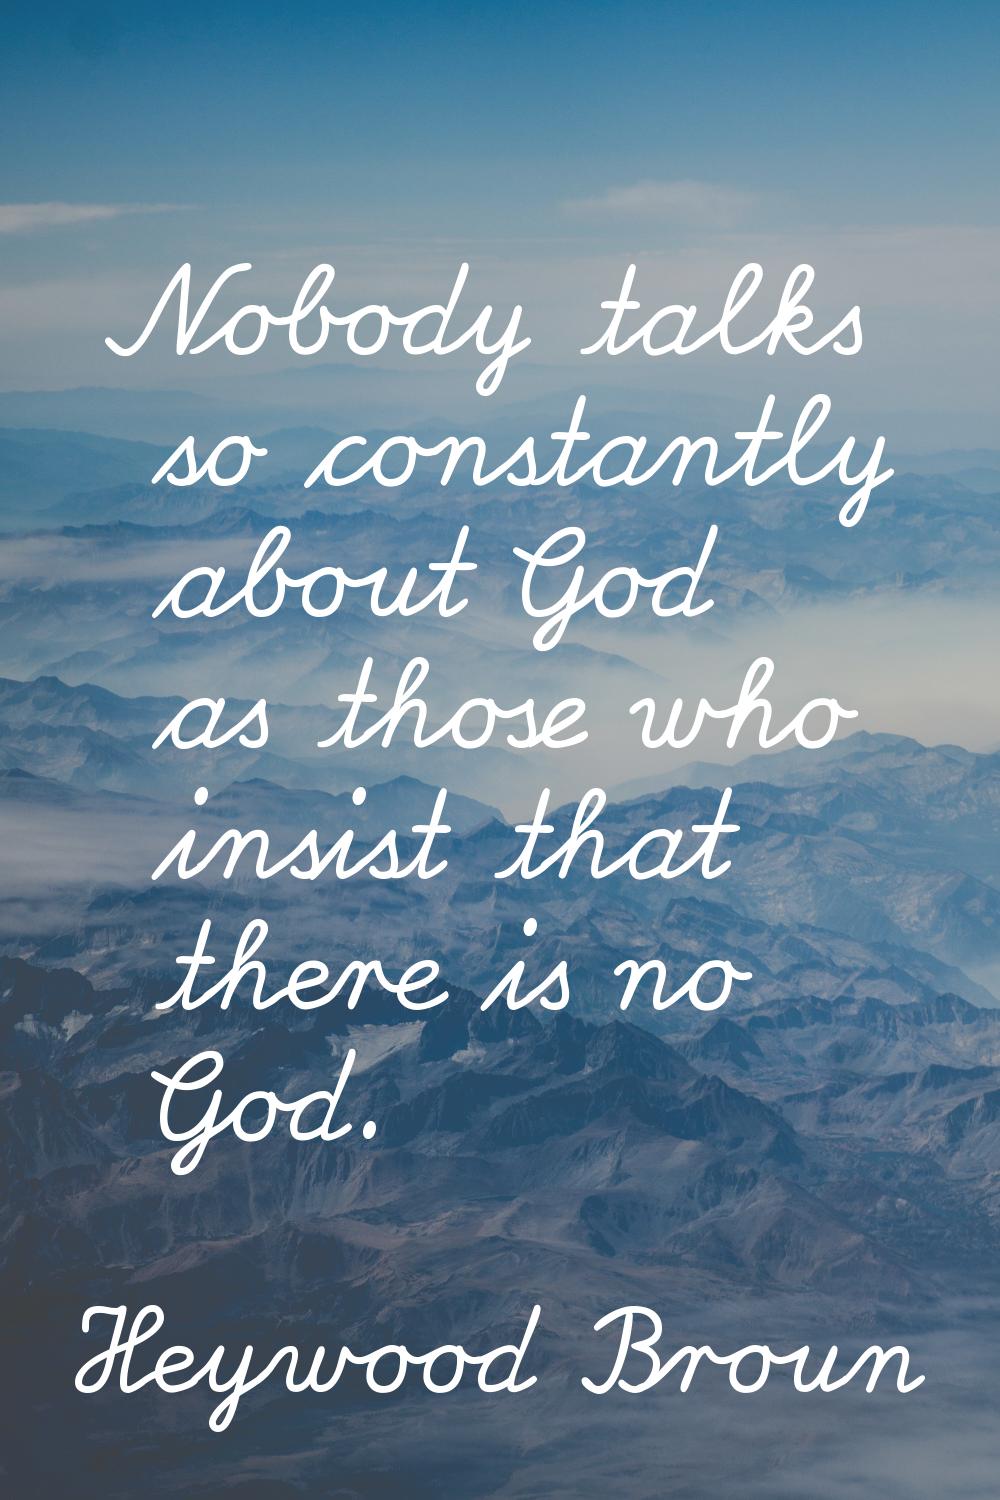 Nobody talks so constantly about God as those who insist that there is no God.